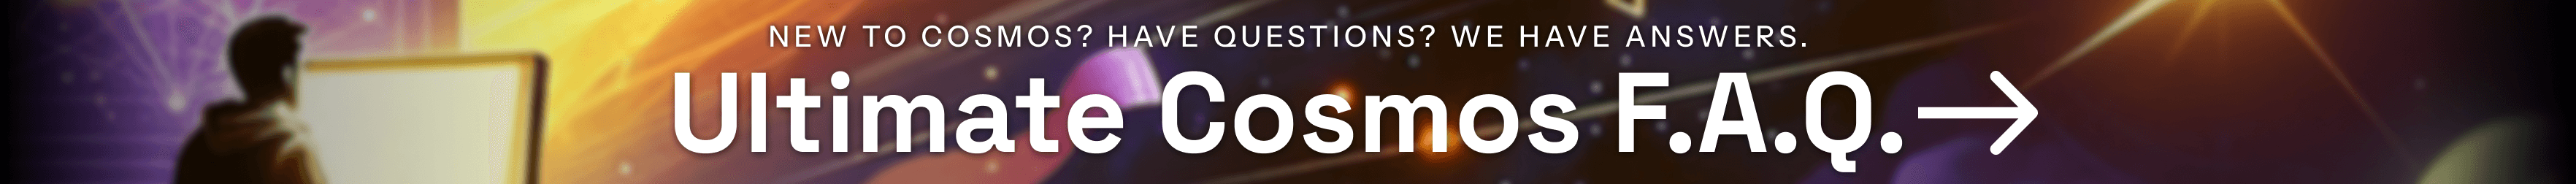 Get all your cosmos questions answered in one place!